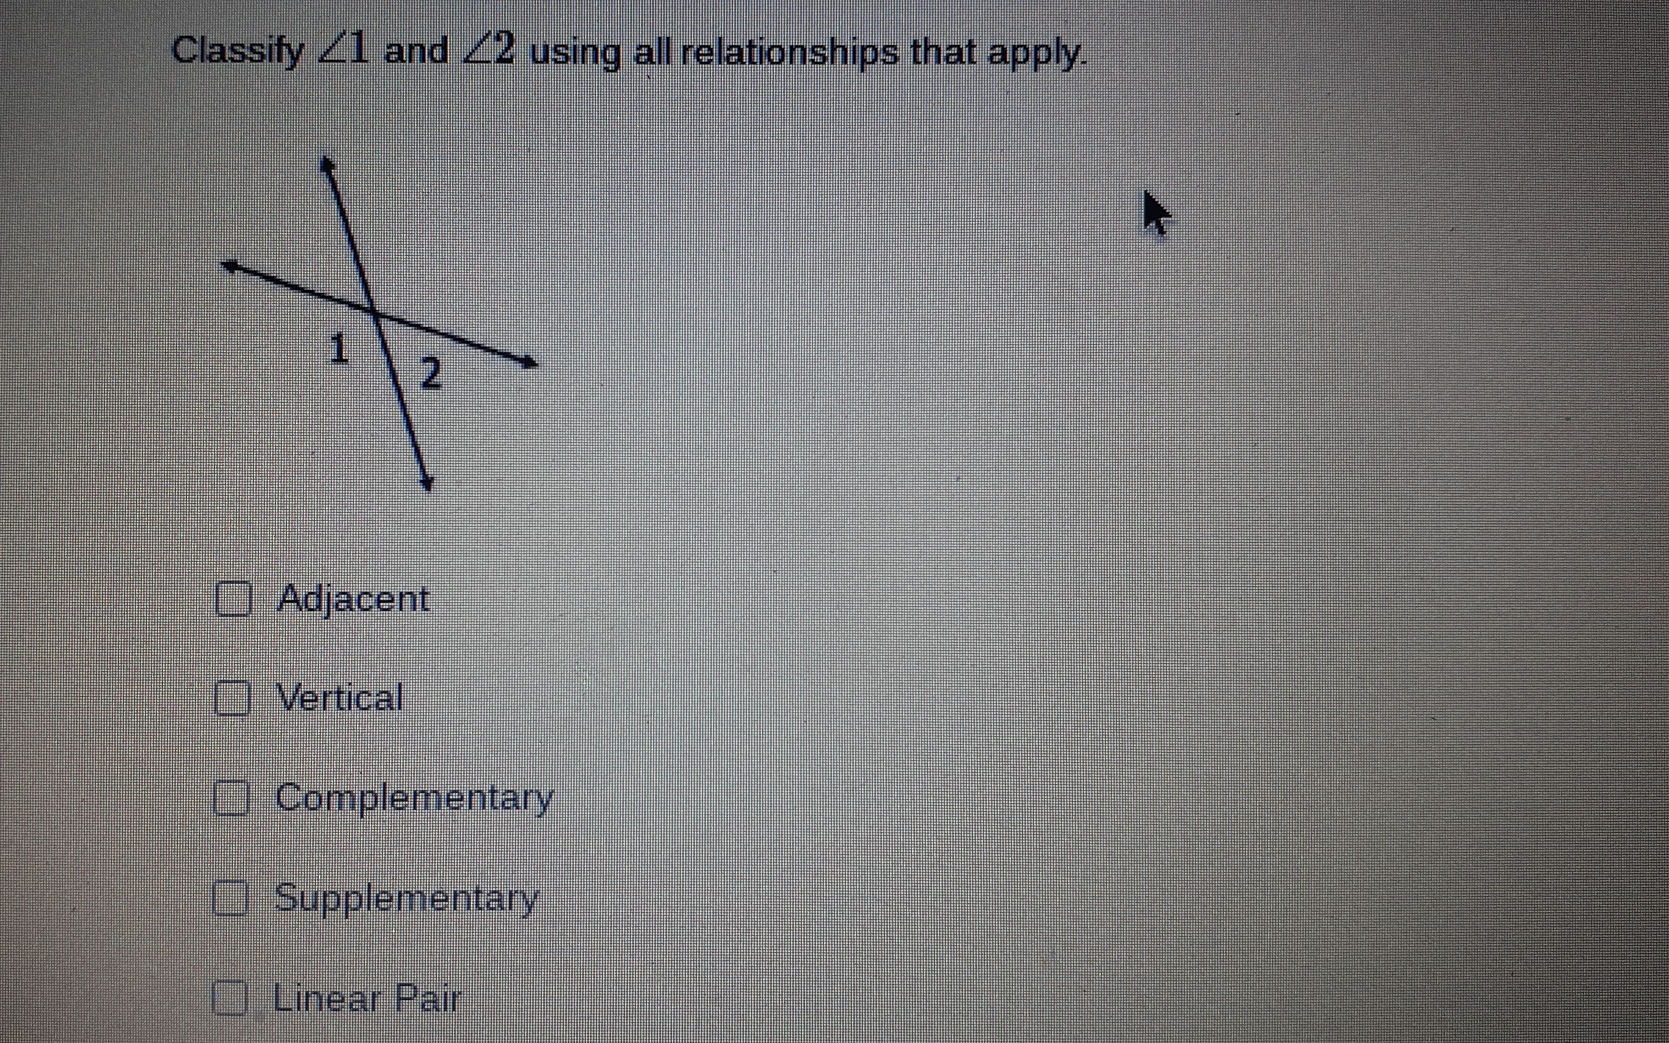 Classify angle 1 and angle 2 using all relationships that apply. Adjacent Vertical Complementary Supplementary Linear Pair